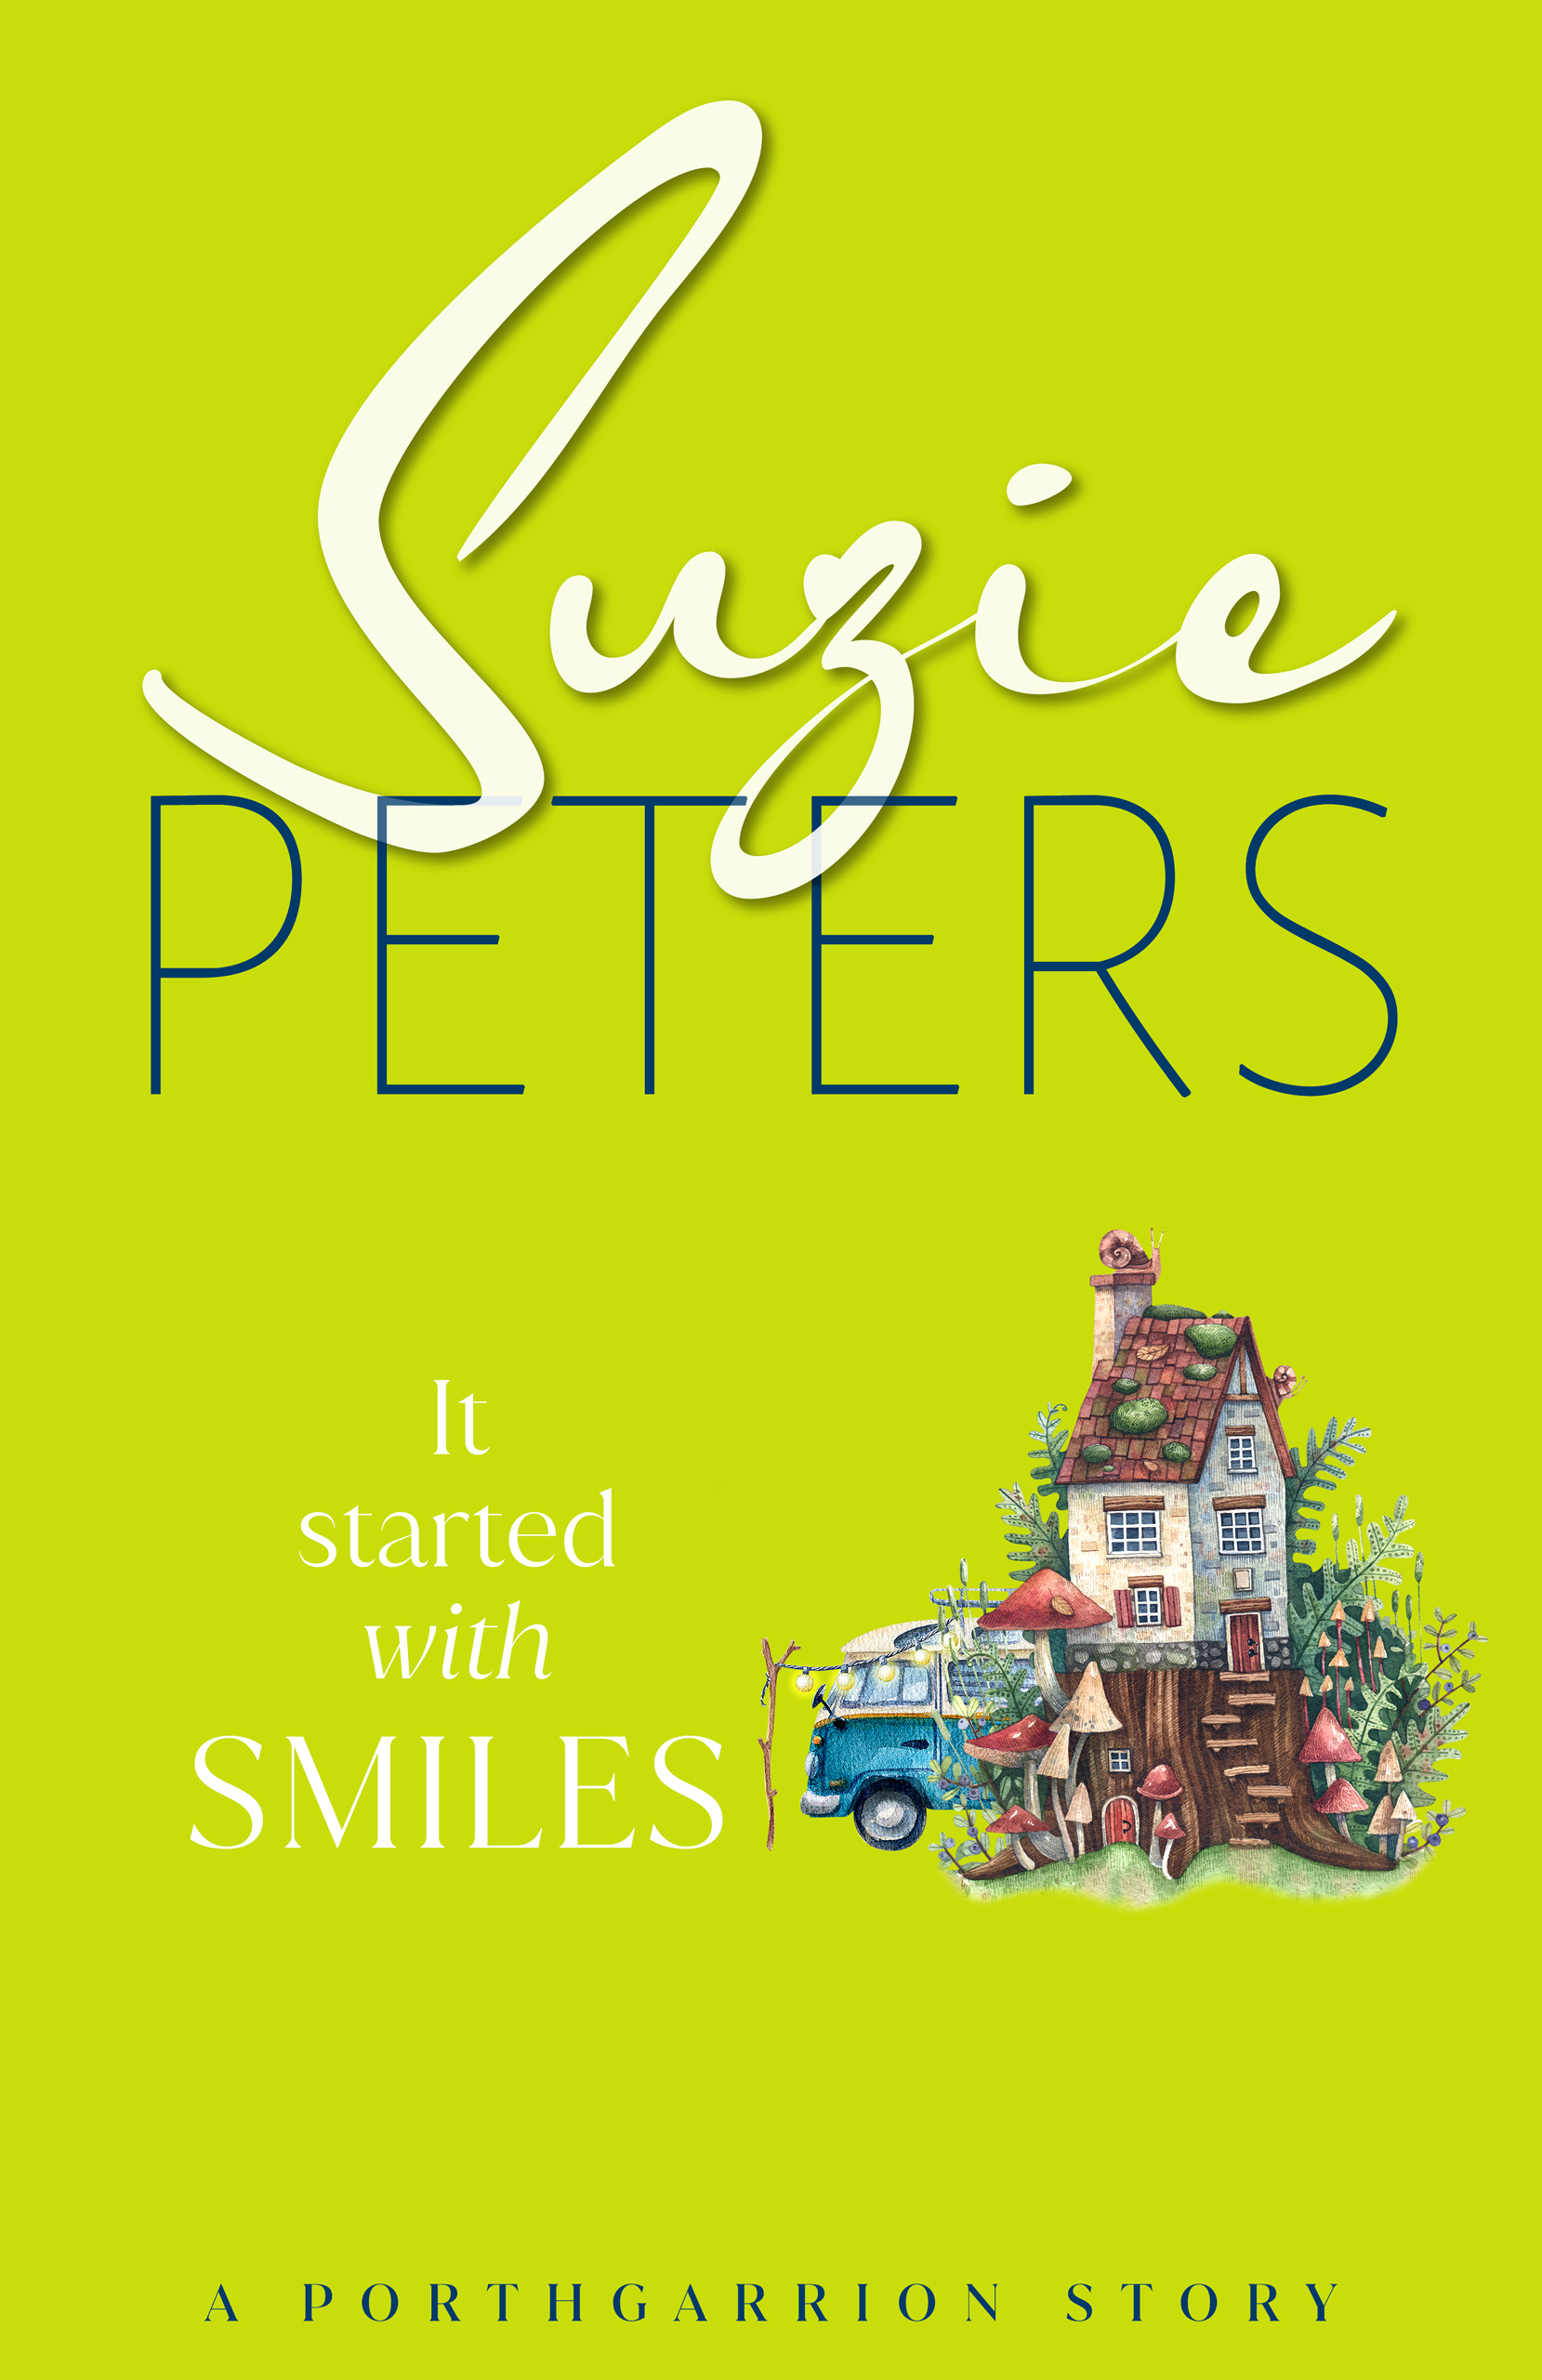 Porthgarrion Series: It Started with Smiles by Suzie Peters.